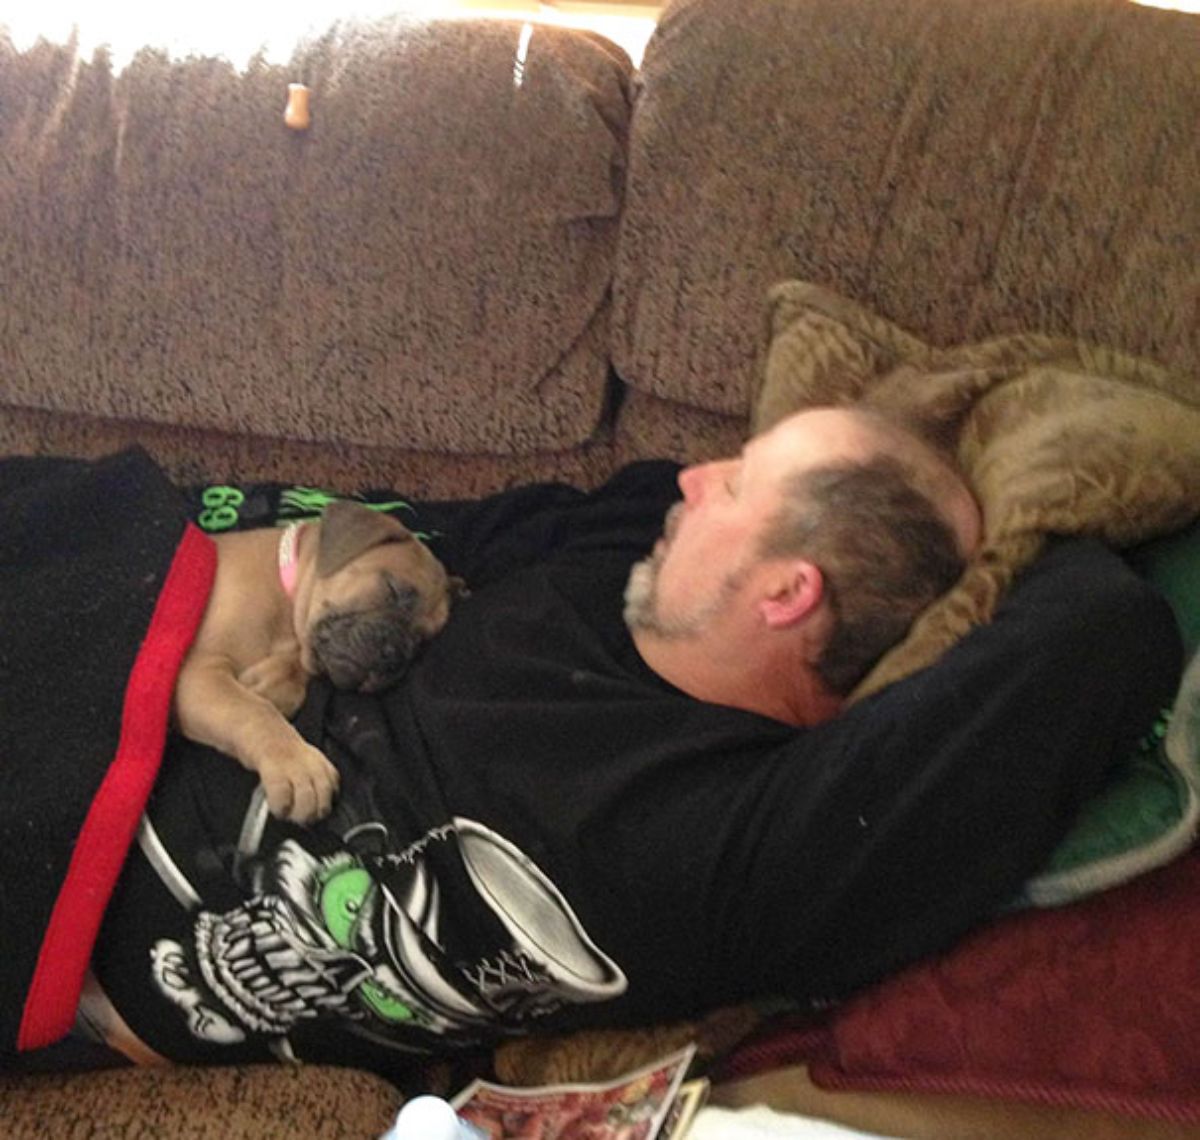 man sleeping on couch with a brown puppy sleeping on his stomach